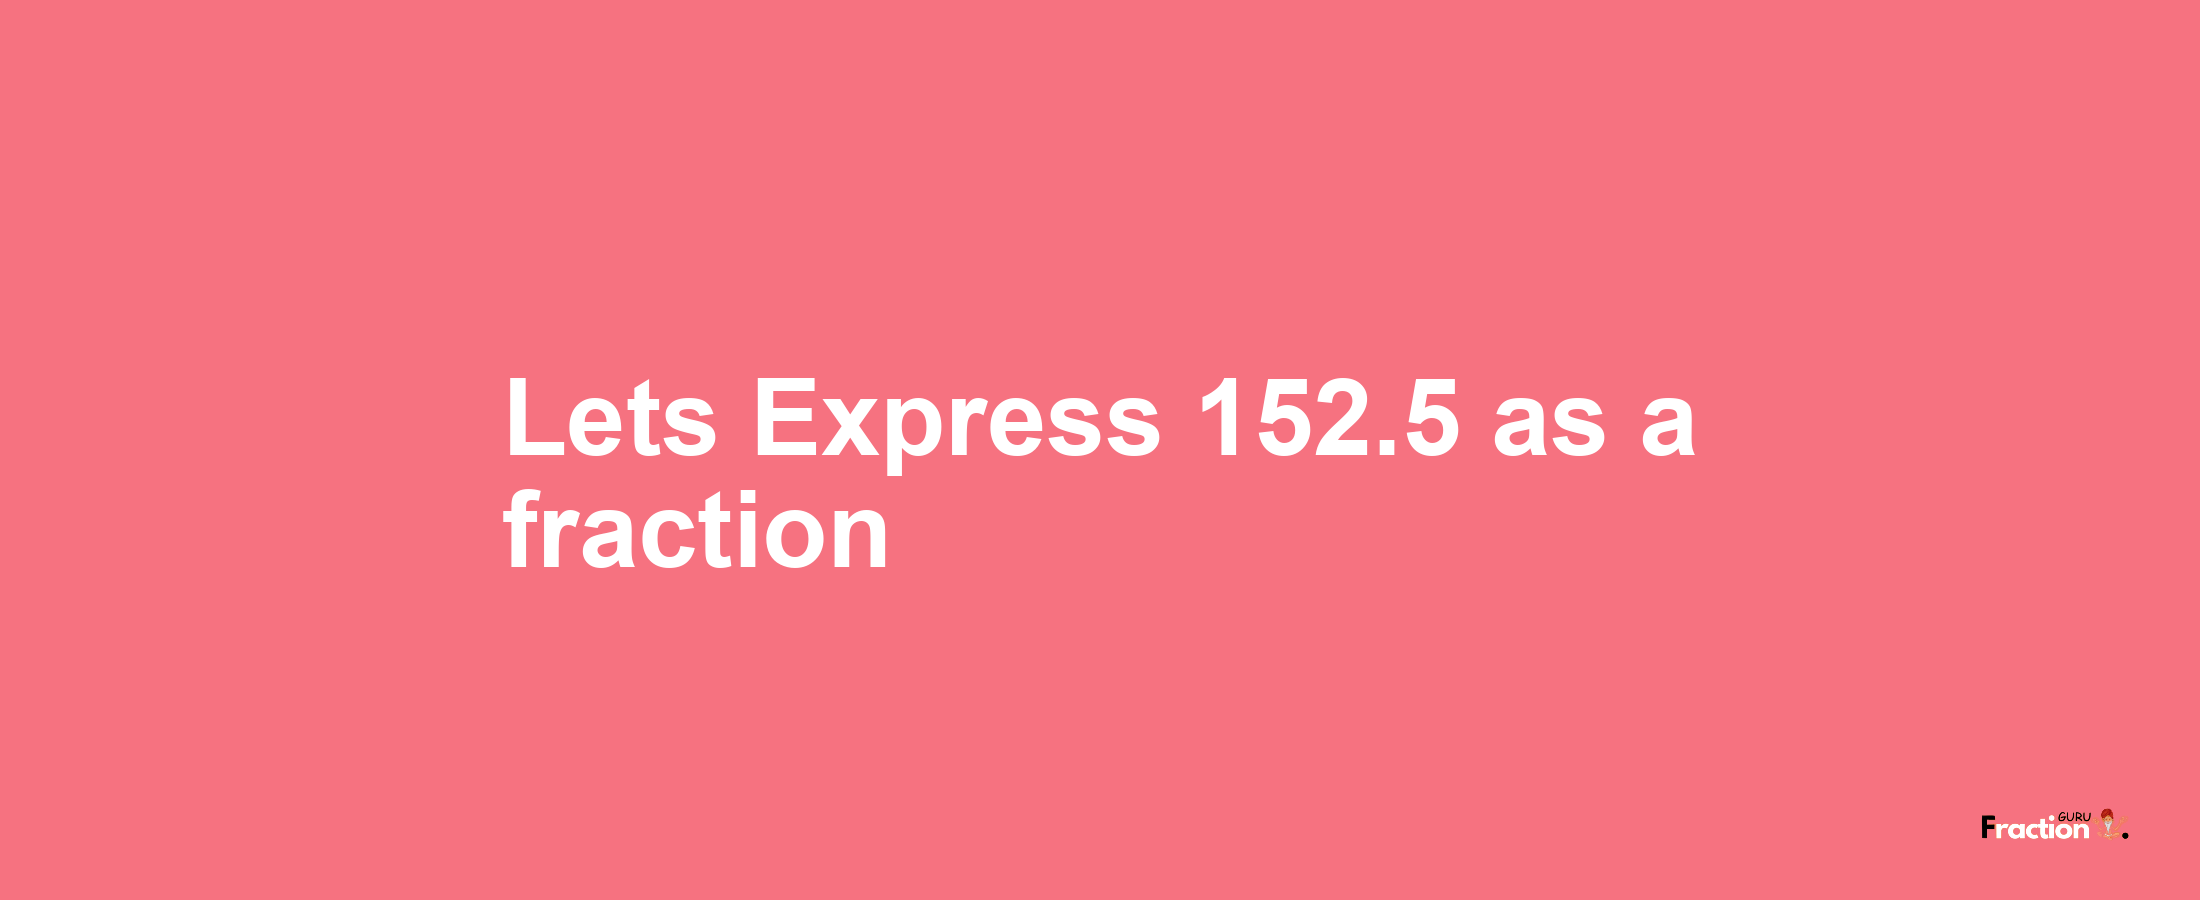 Lets Express 152.5 as afraction